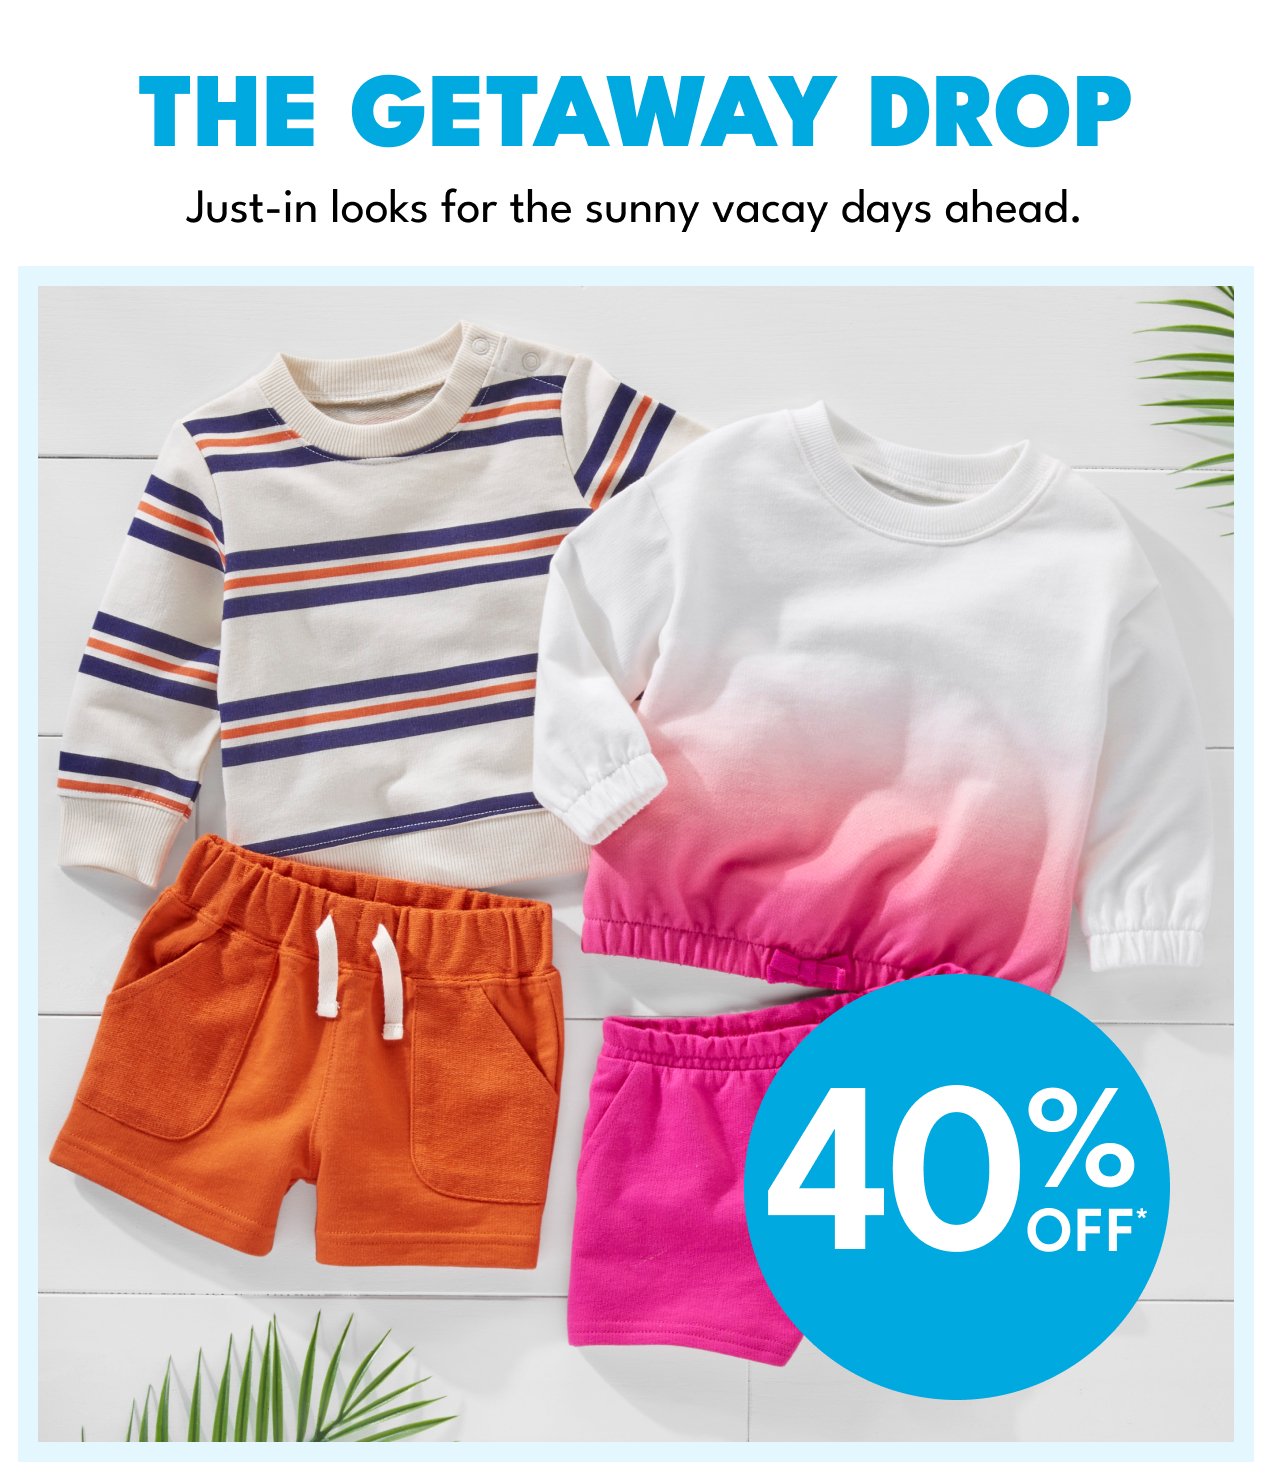 THE GETAWAY DROP | Just-in looks for the sunny vacay days ahead. | 40% OFF*